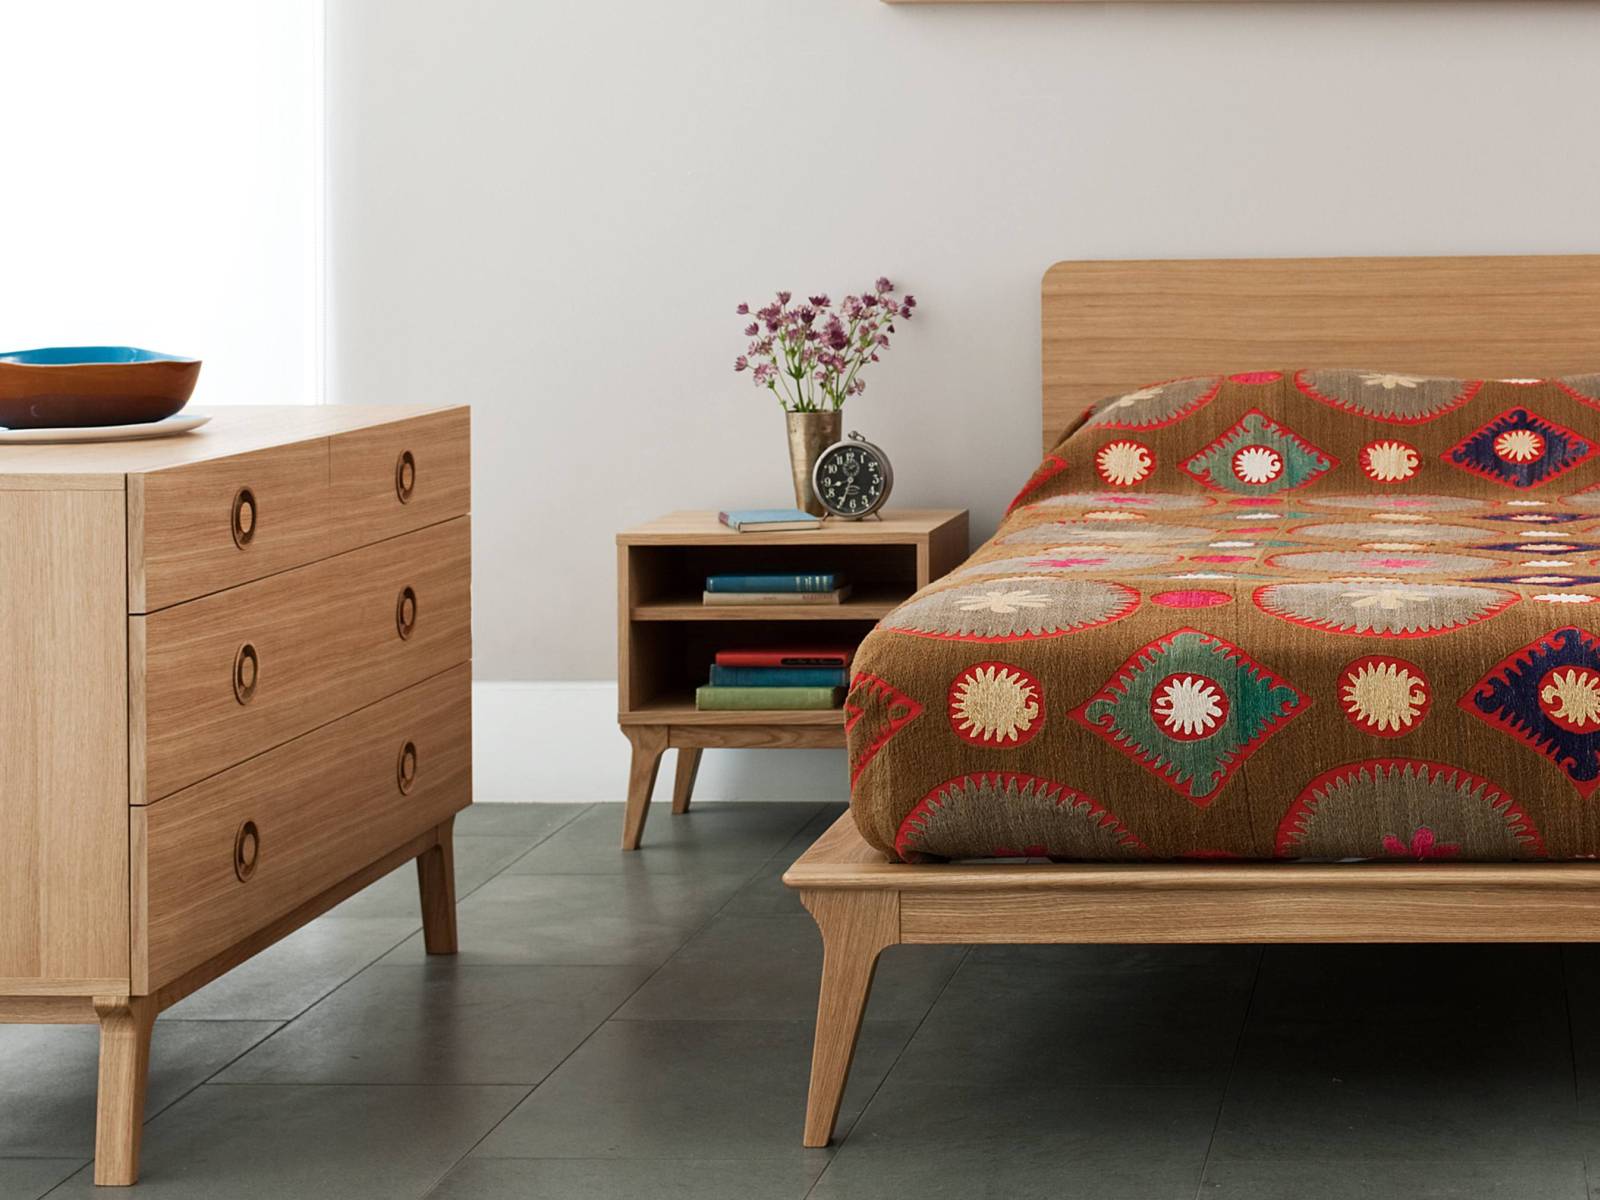 25 Amazing Ideas Of Bedside Tables For Small Spaces